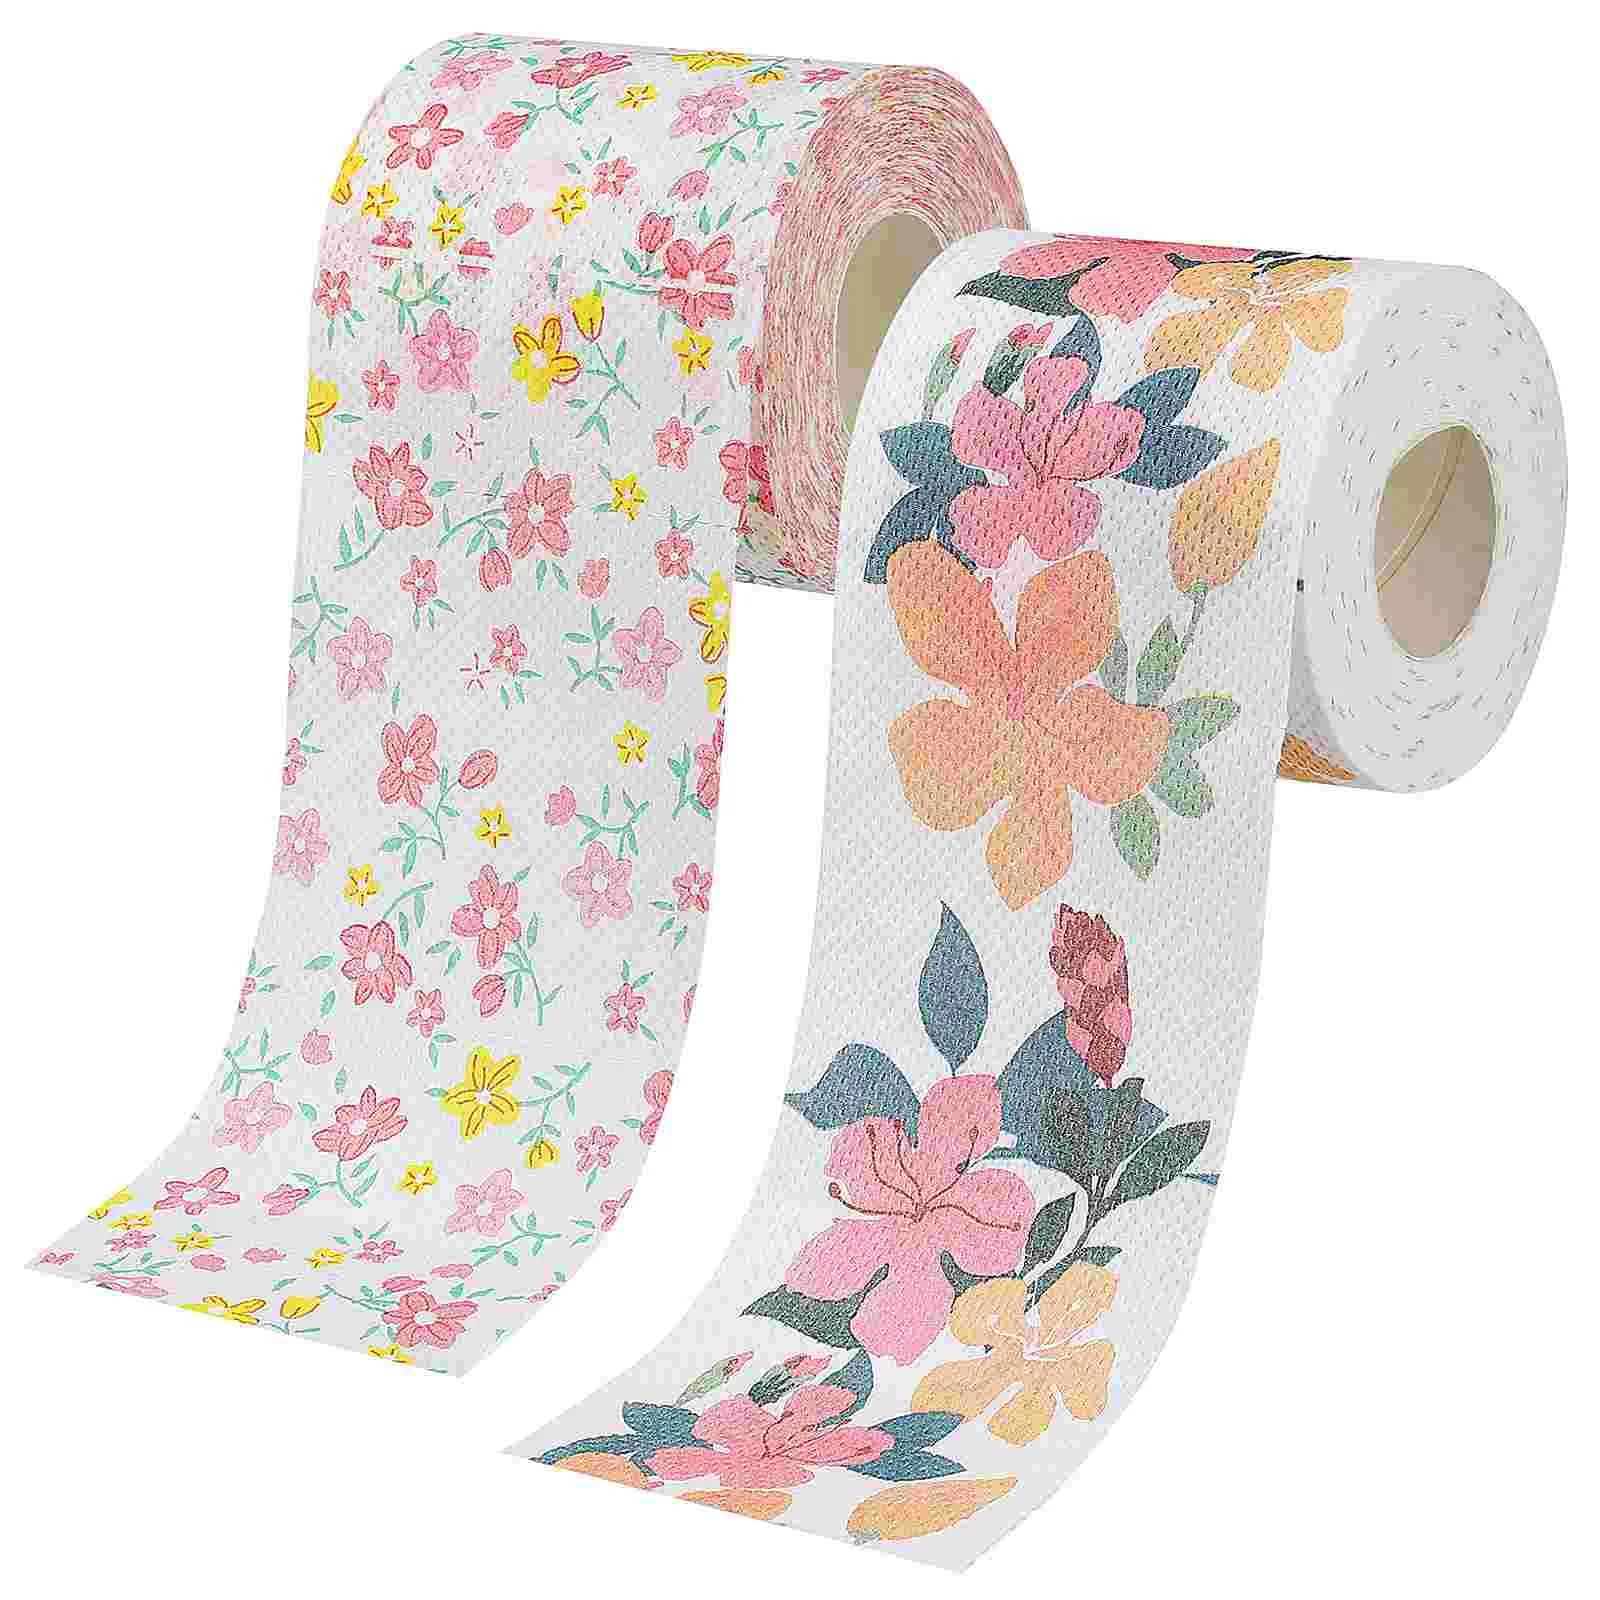 

2 Rolls of Floral Printed Toilet Papers Flower Pattern Toilet Tissues Decorative Napkins for Home Office Travel